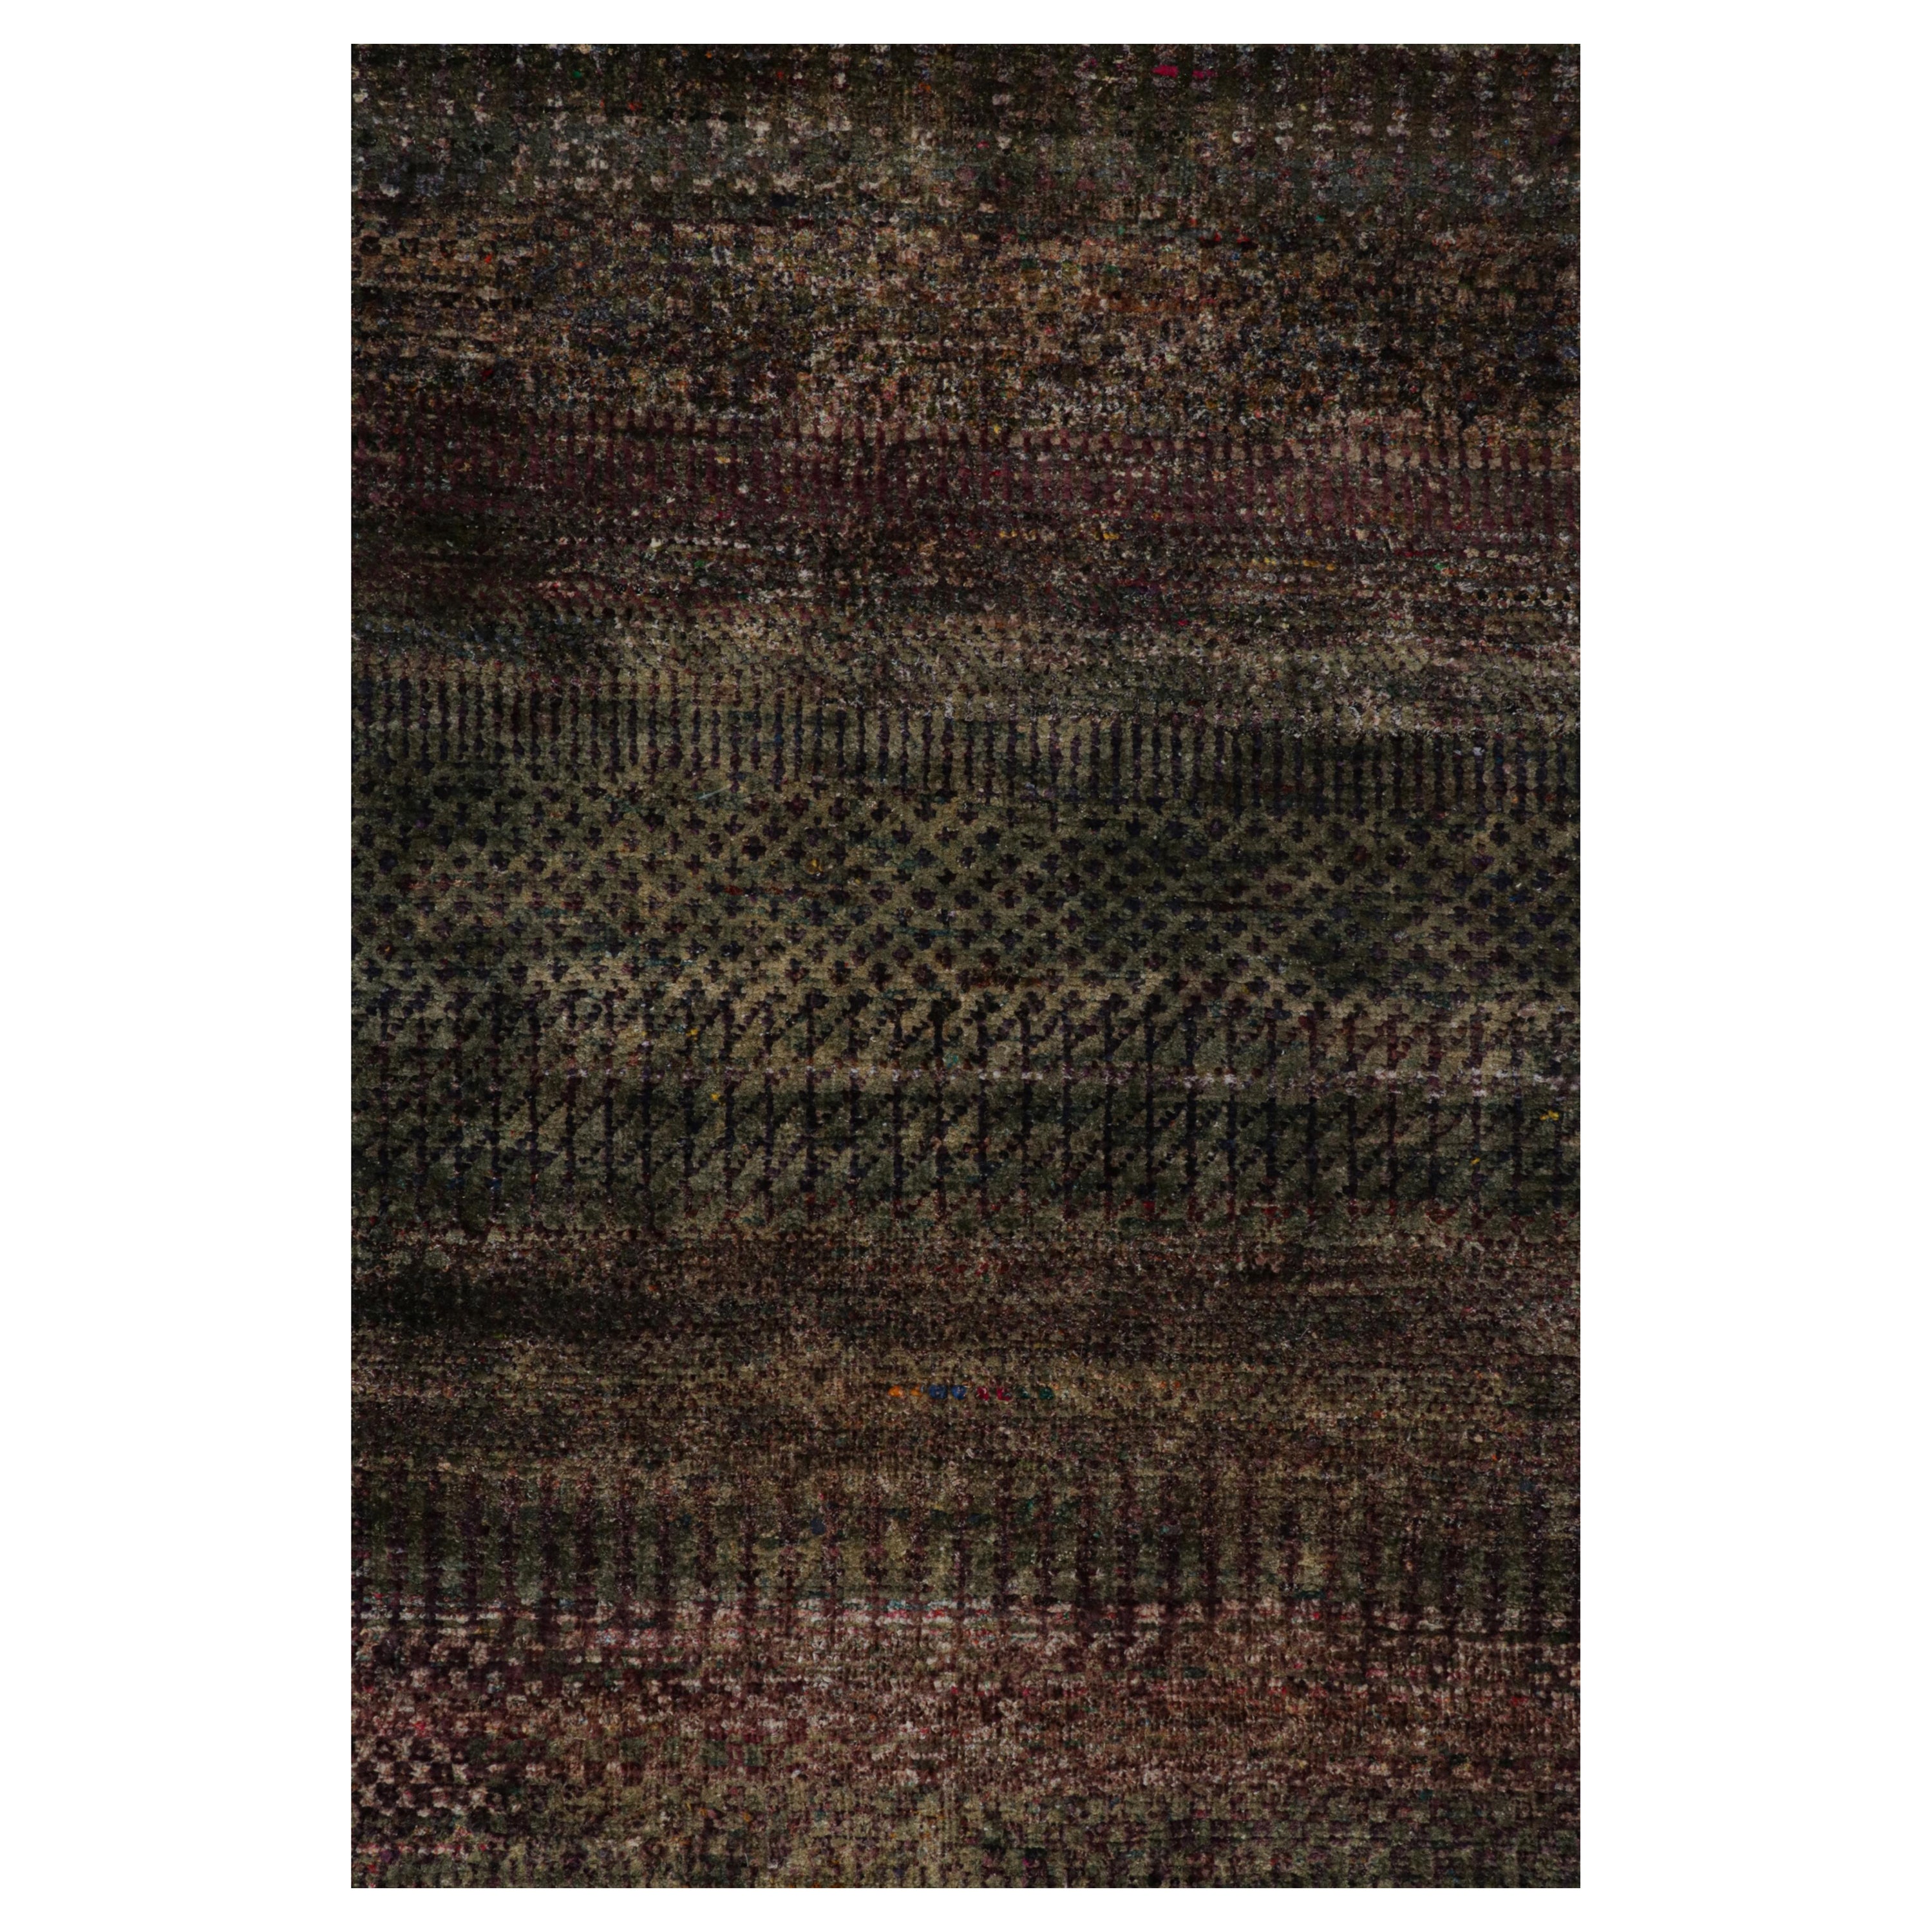 This 12x15 textural rug is a bold new addition to Rug & Kilim’s Texture of Color collection, made with hand-knotted silk and a new take on the theme of this collection—particularly a vegetable dye like those used in antique or vintage rugs that